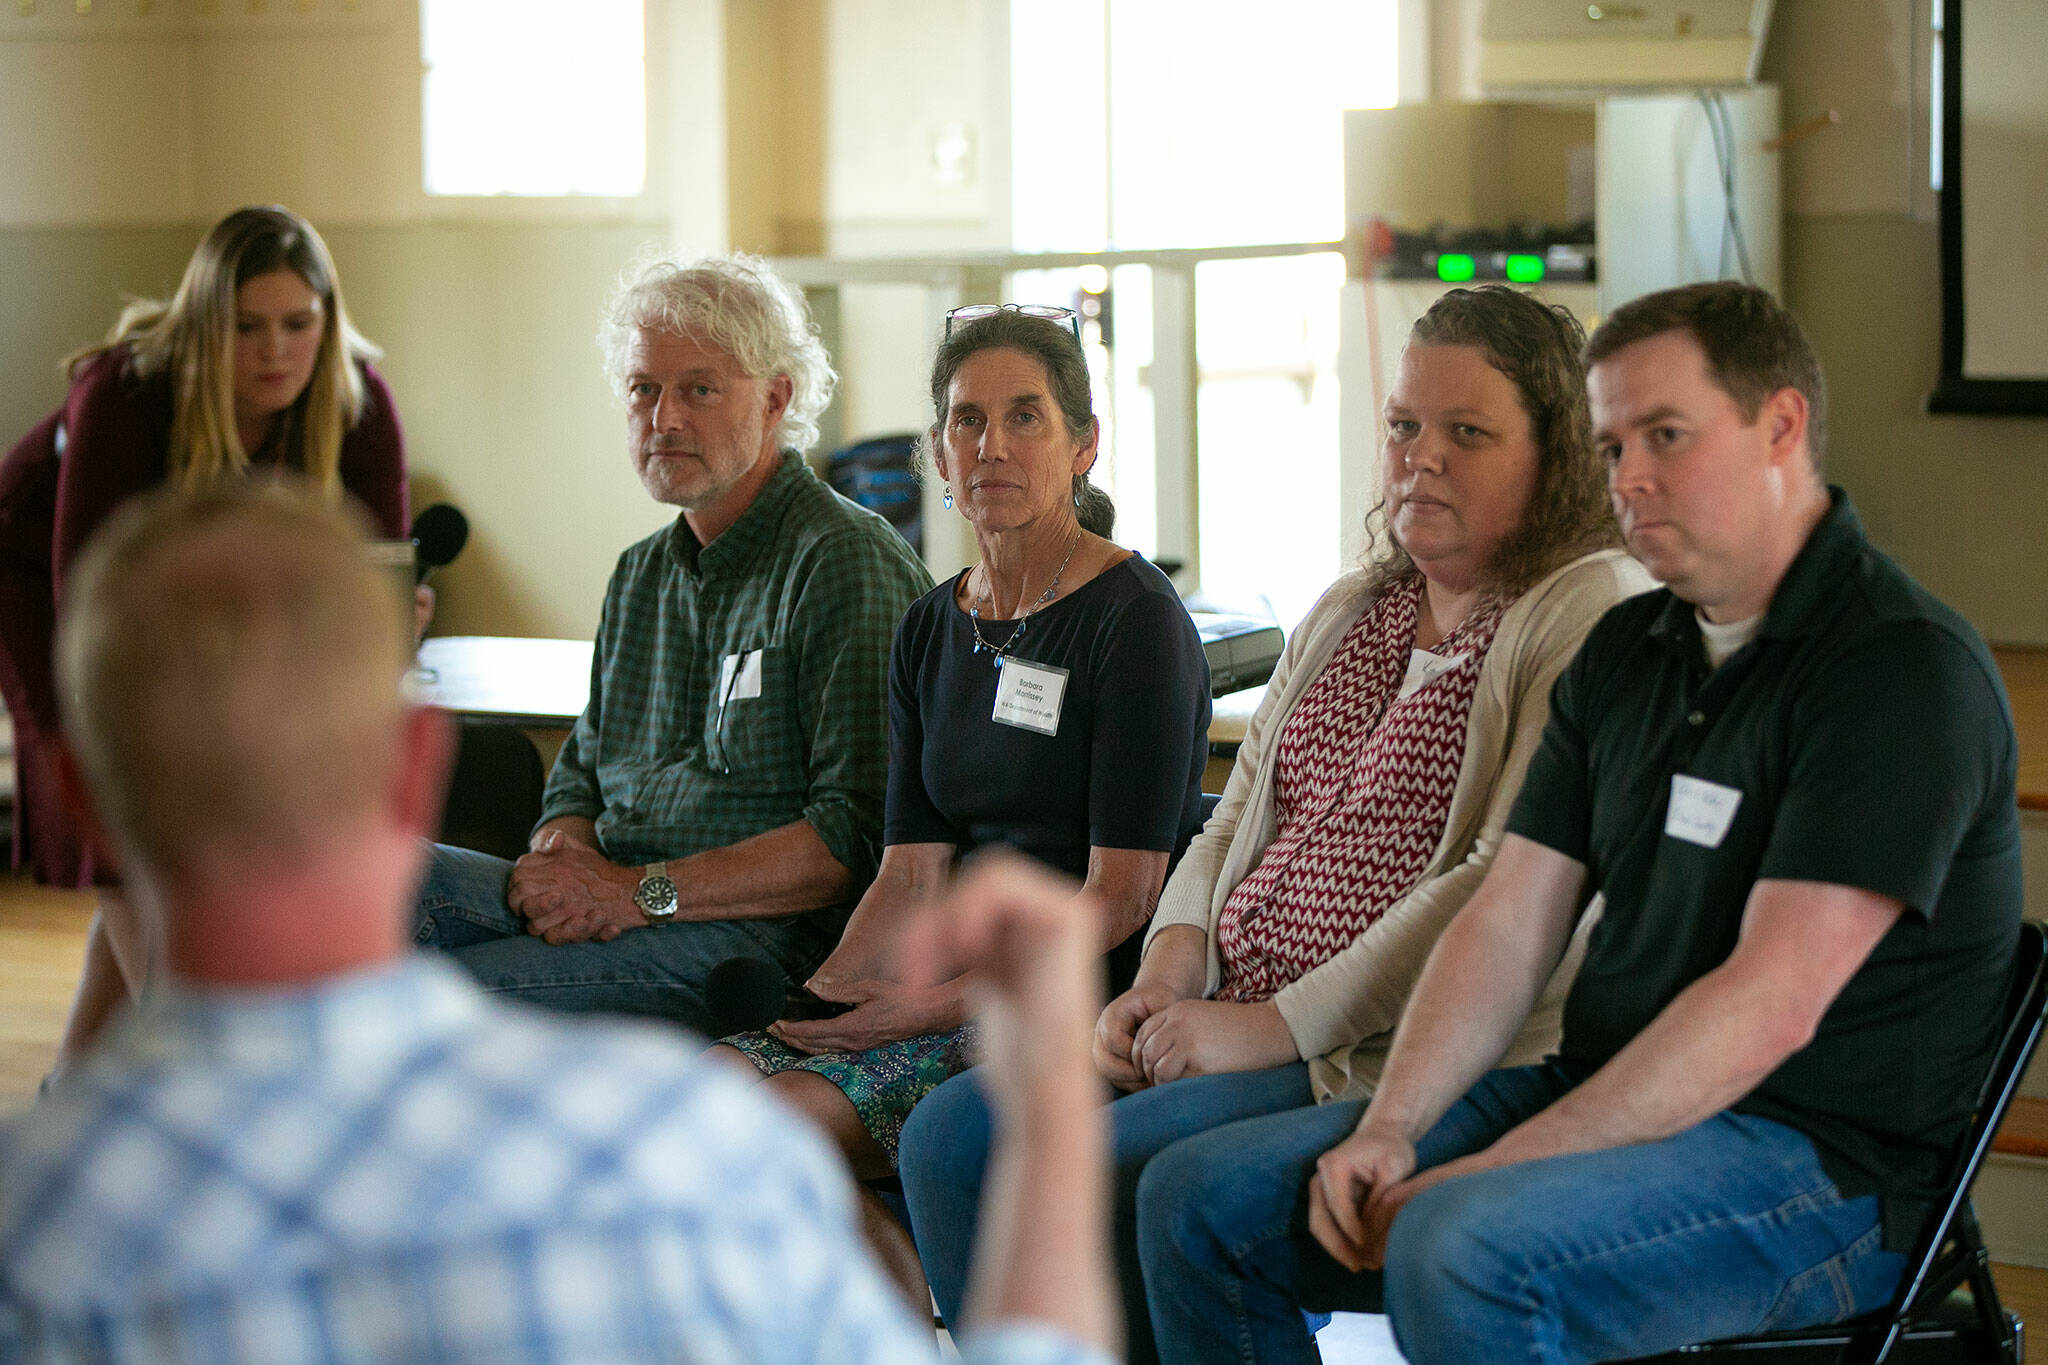 Representatives from different government organizations listen to a Harrington Lagoon resident speak about PFAS found in their drinking water during a public forum on June 22, 2023, at the Coupeville Recreation Hall in Coupeville, Washington. From left are Claire Nitsche of the Department of Health, DOH Regional Manager Derek Pell, DOH toxicologist Barbara Morrissey, Department of Ecology’s Kim Wooten and Island County hydrogeologist Chris Kelley. (Ryan Berry / The Herald)